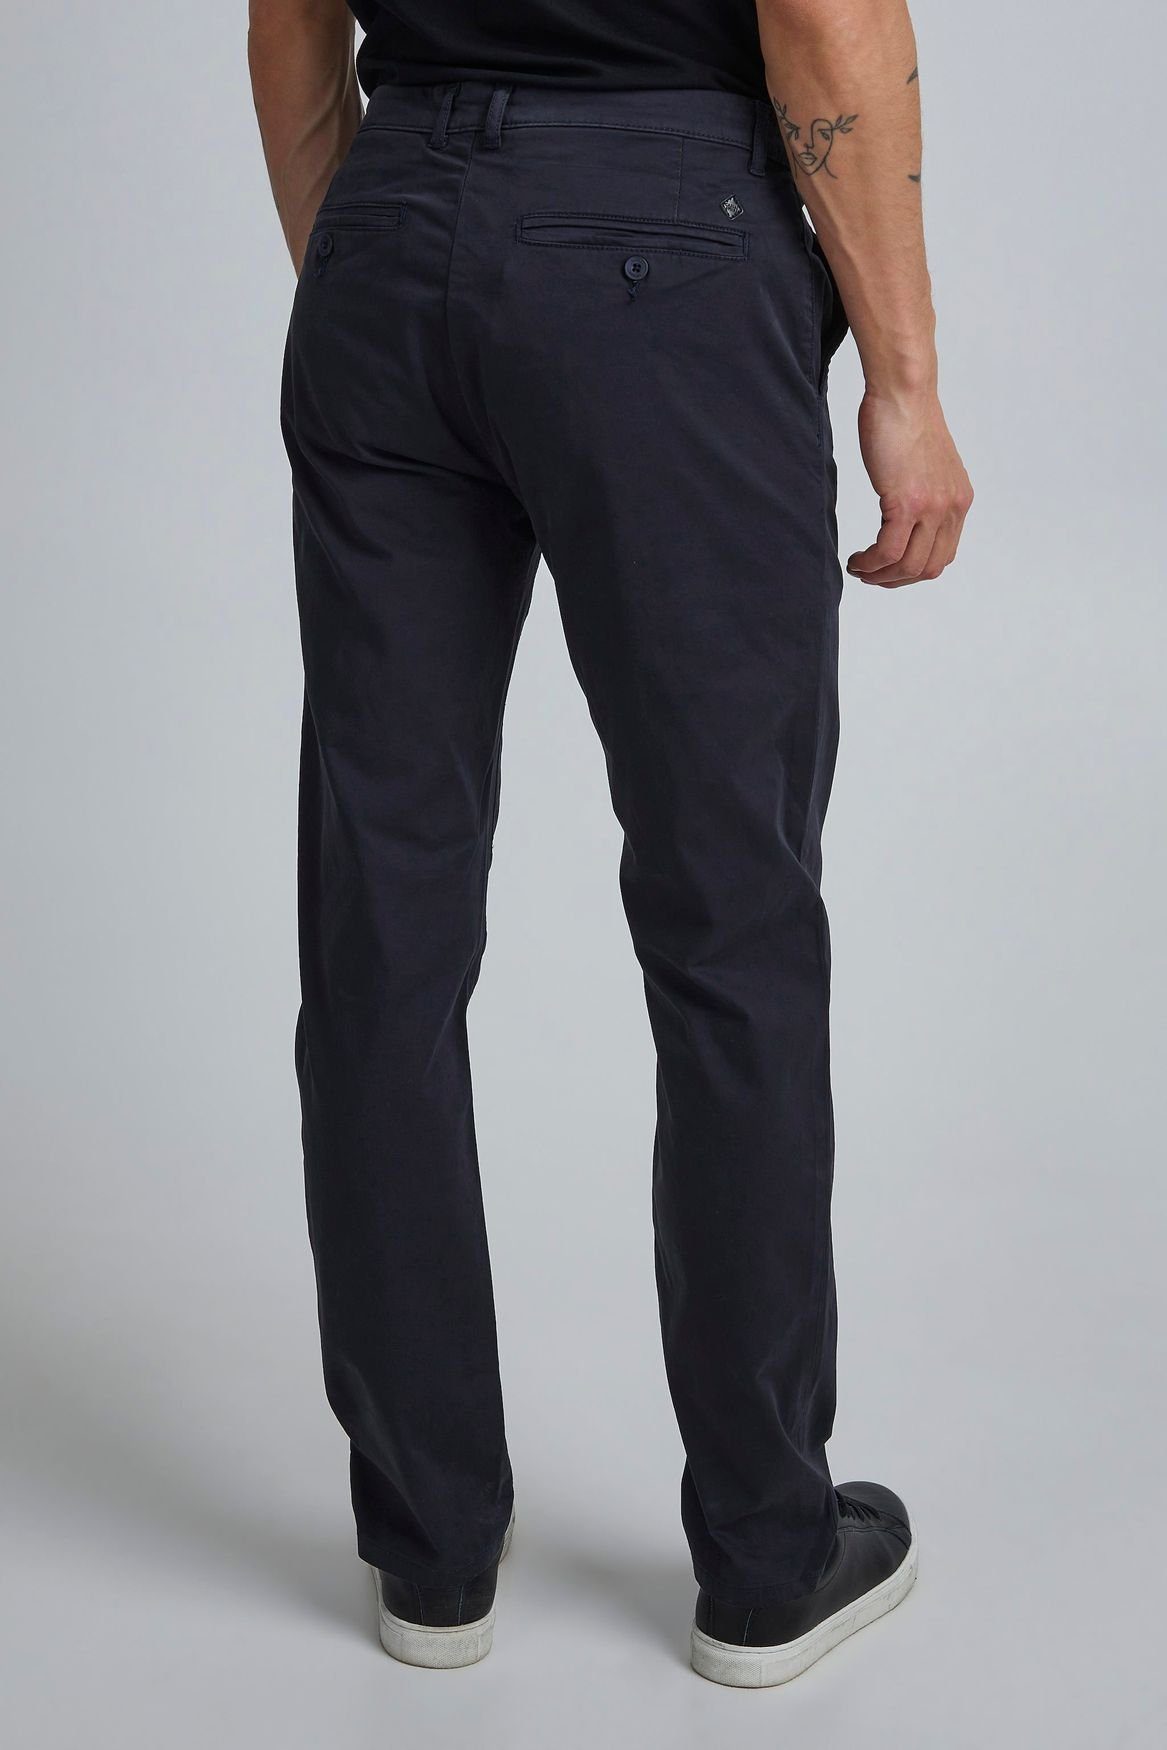 4239 Slim Casual in Hose Business Navy VIGGO Chino Chinohose Friday Fit Stoff Casual